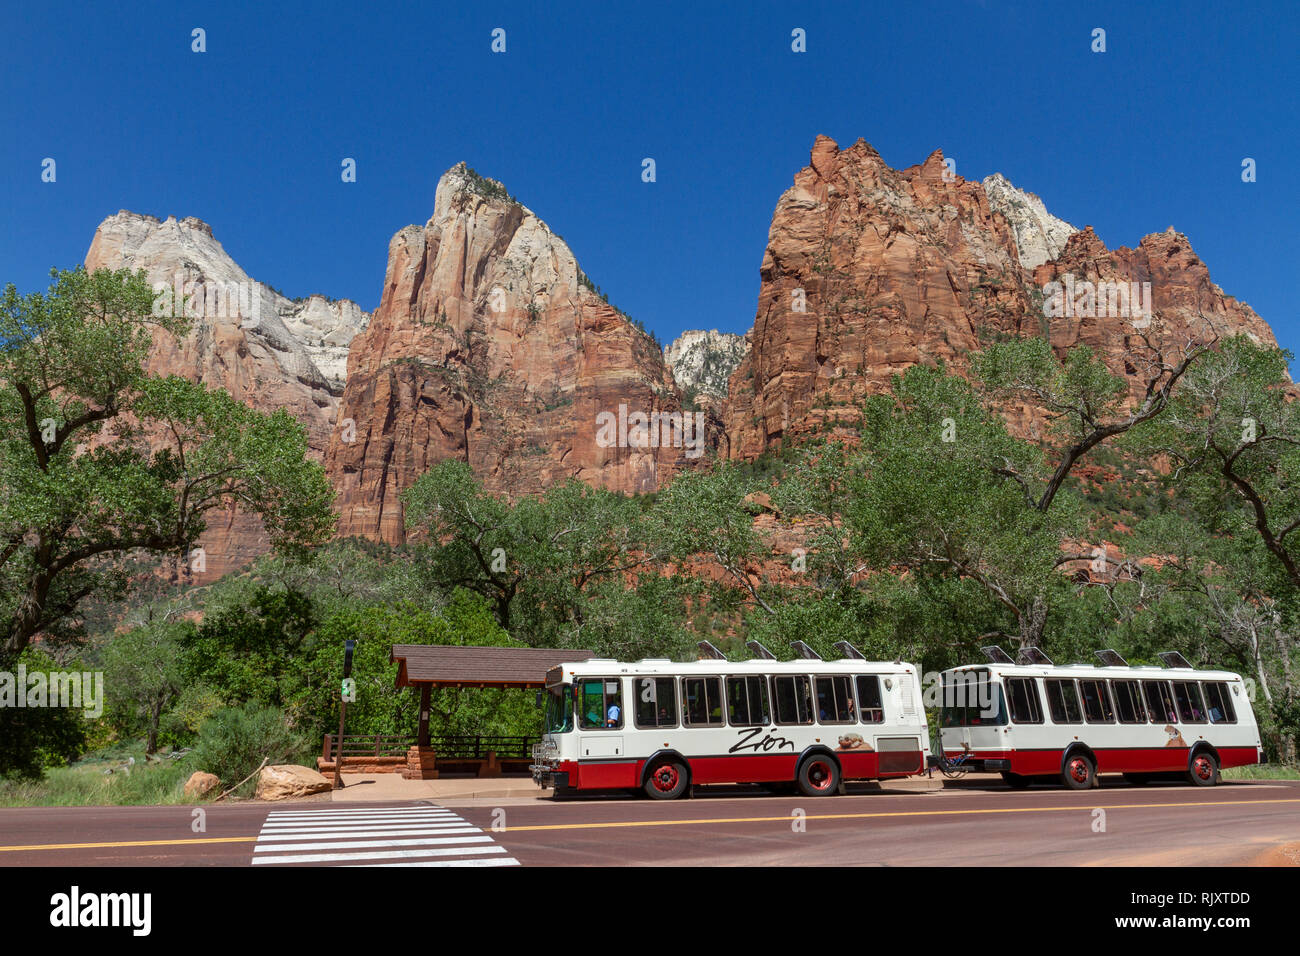 The Court of the Patriarchs (L-R: Abraham Peak, Isaac Peak, and Jacob Peak) in Zion National Park, Springdale, Utah, United States. Stock Photo